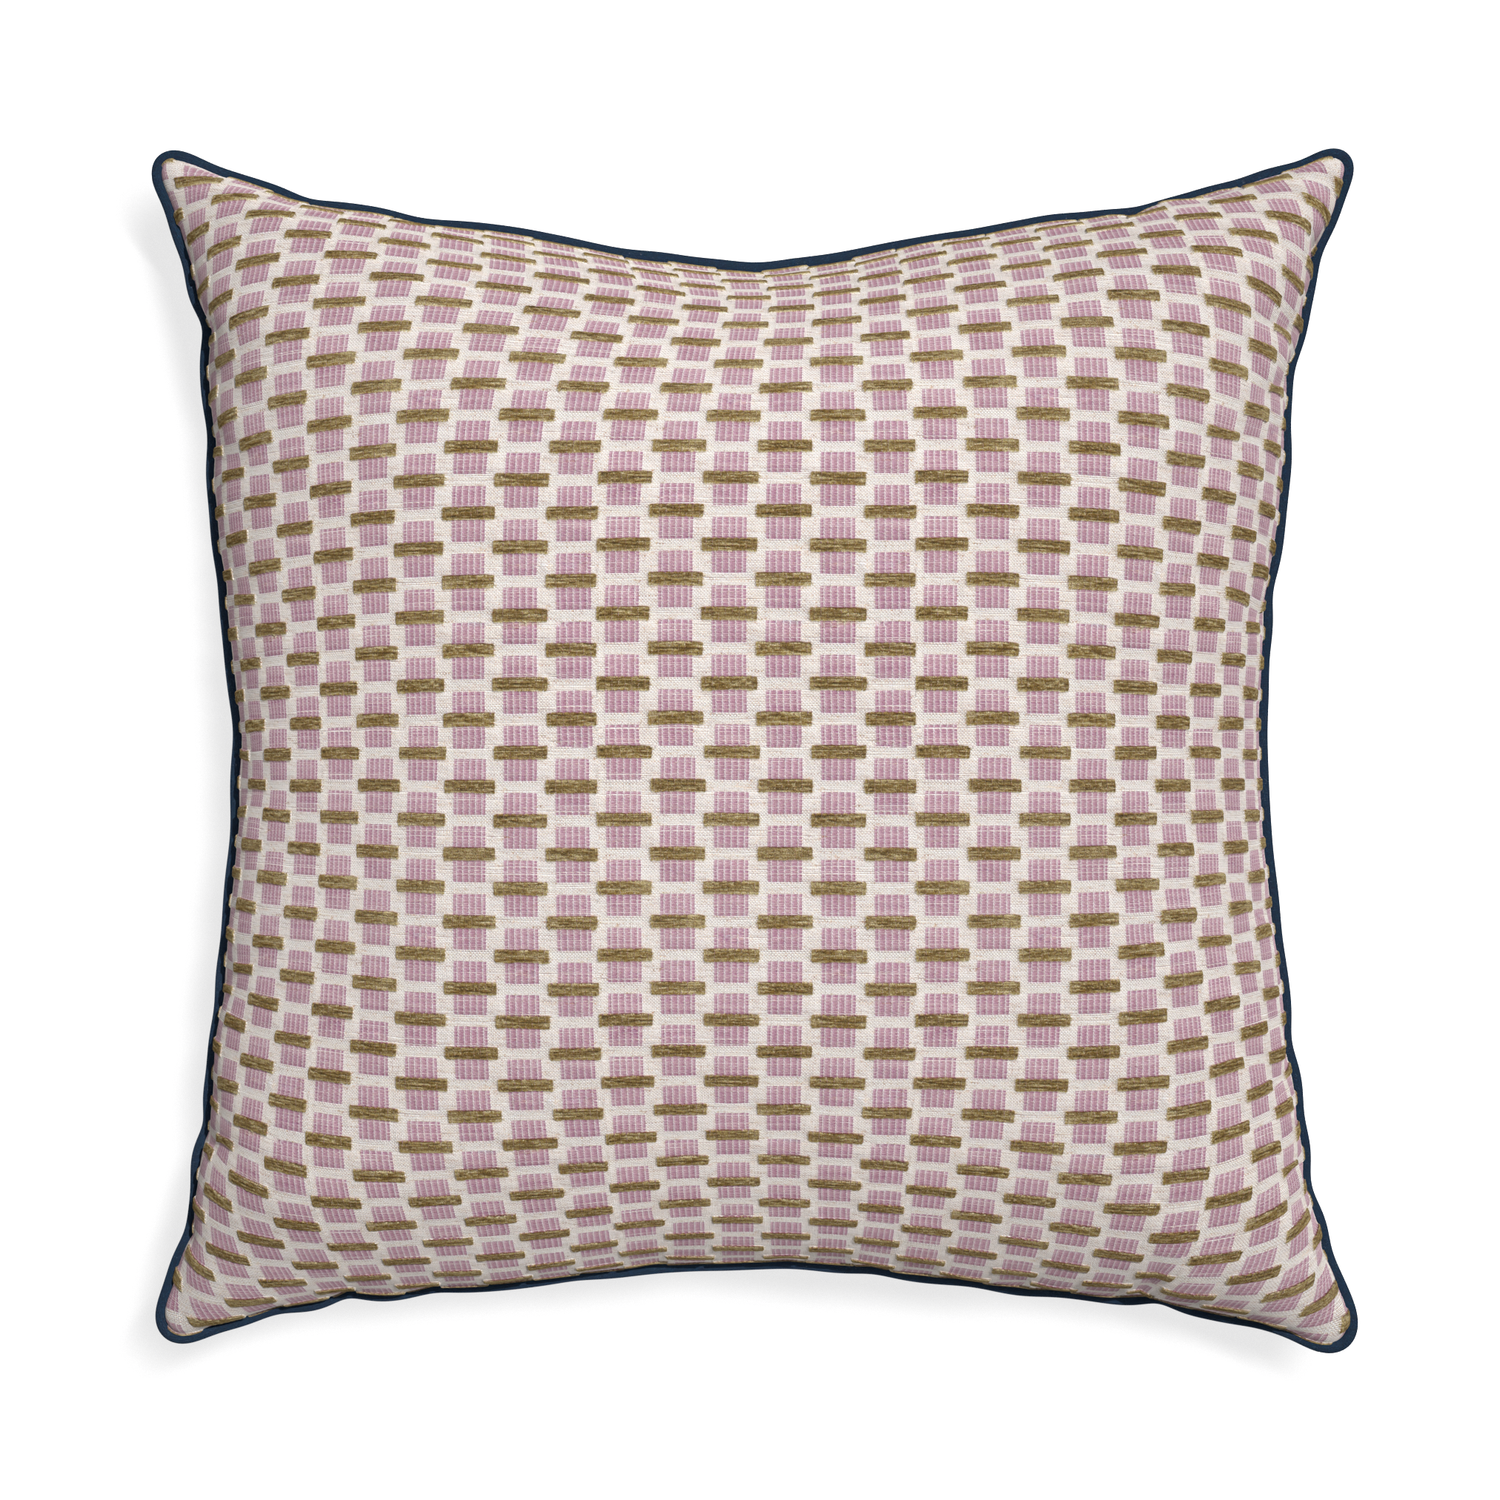 Euro-sham willow orchid custom pink geometric chenillepillow with c piping on white background